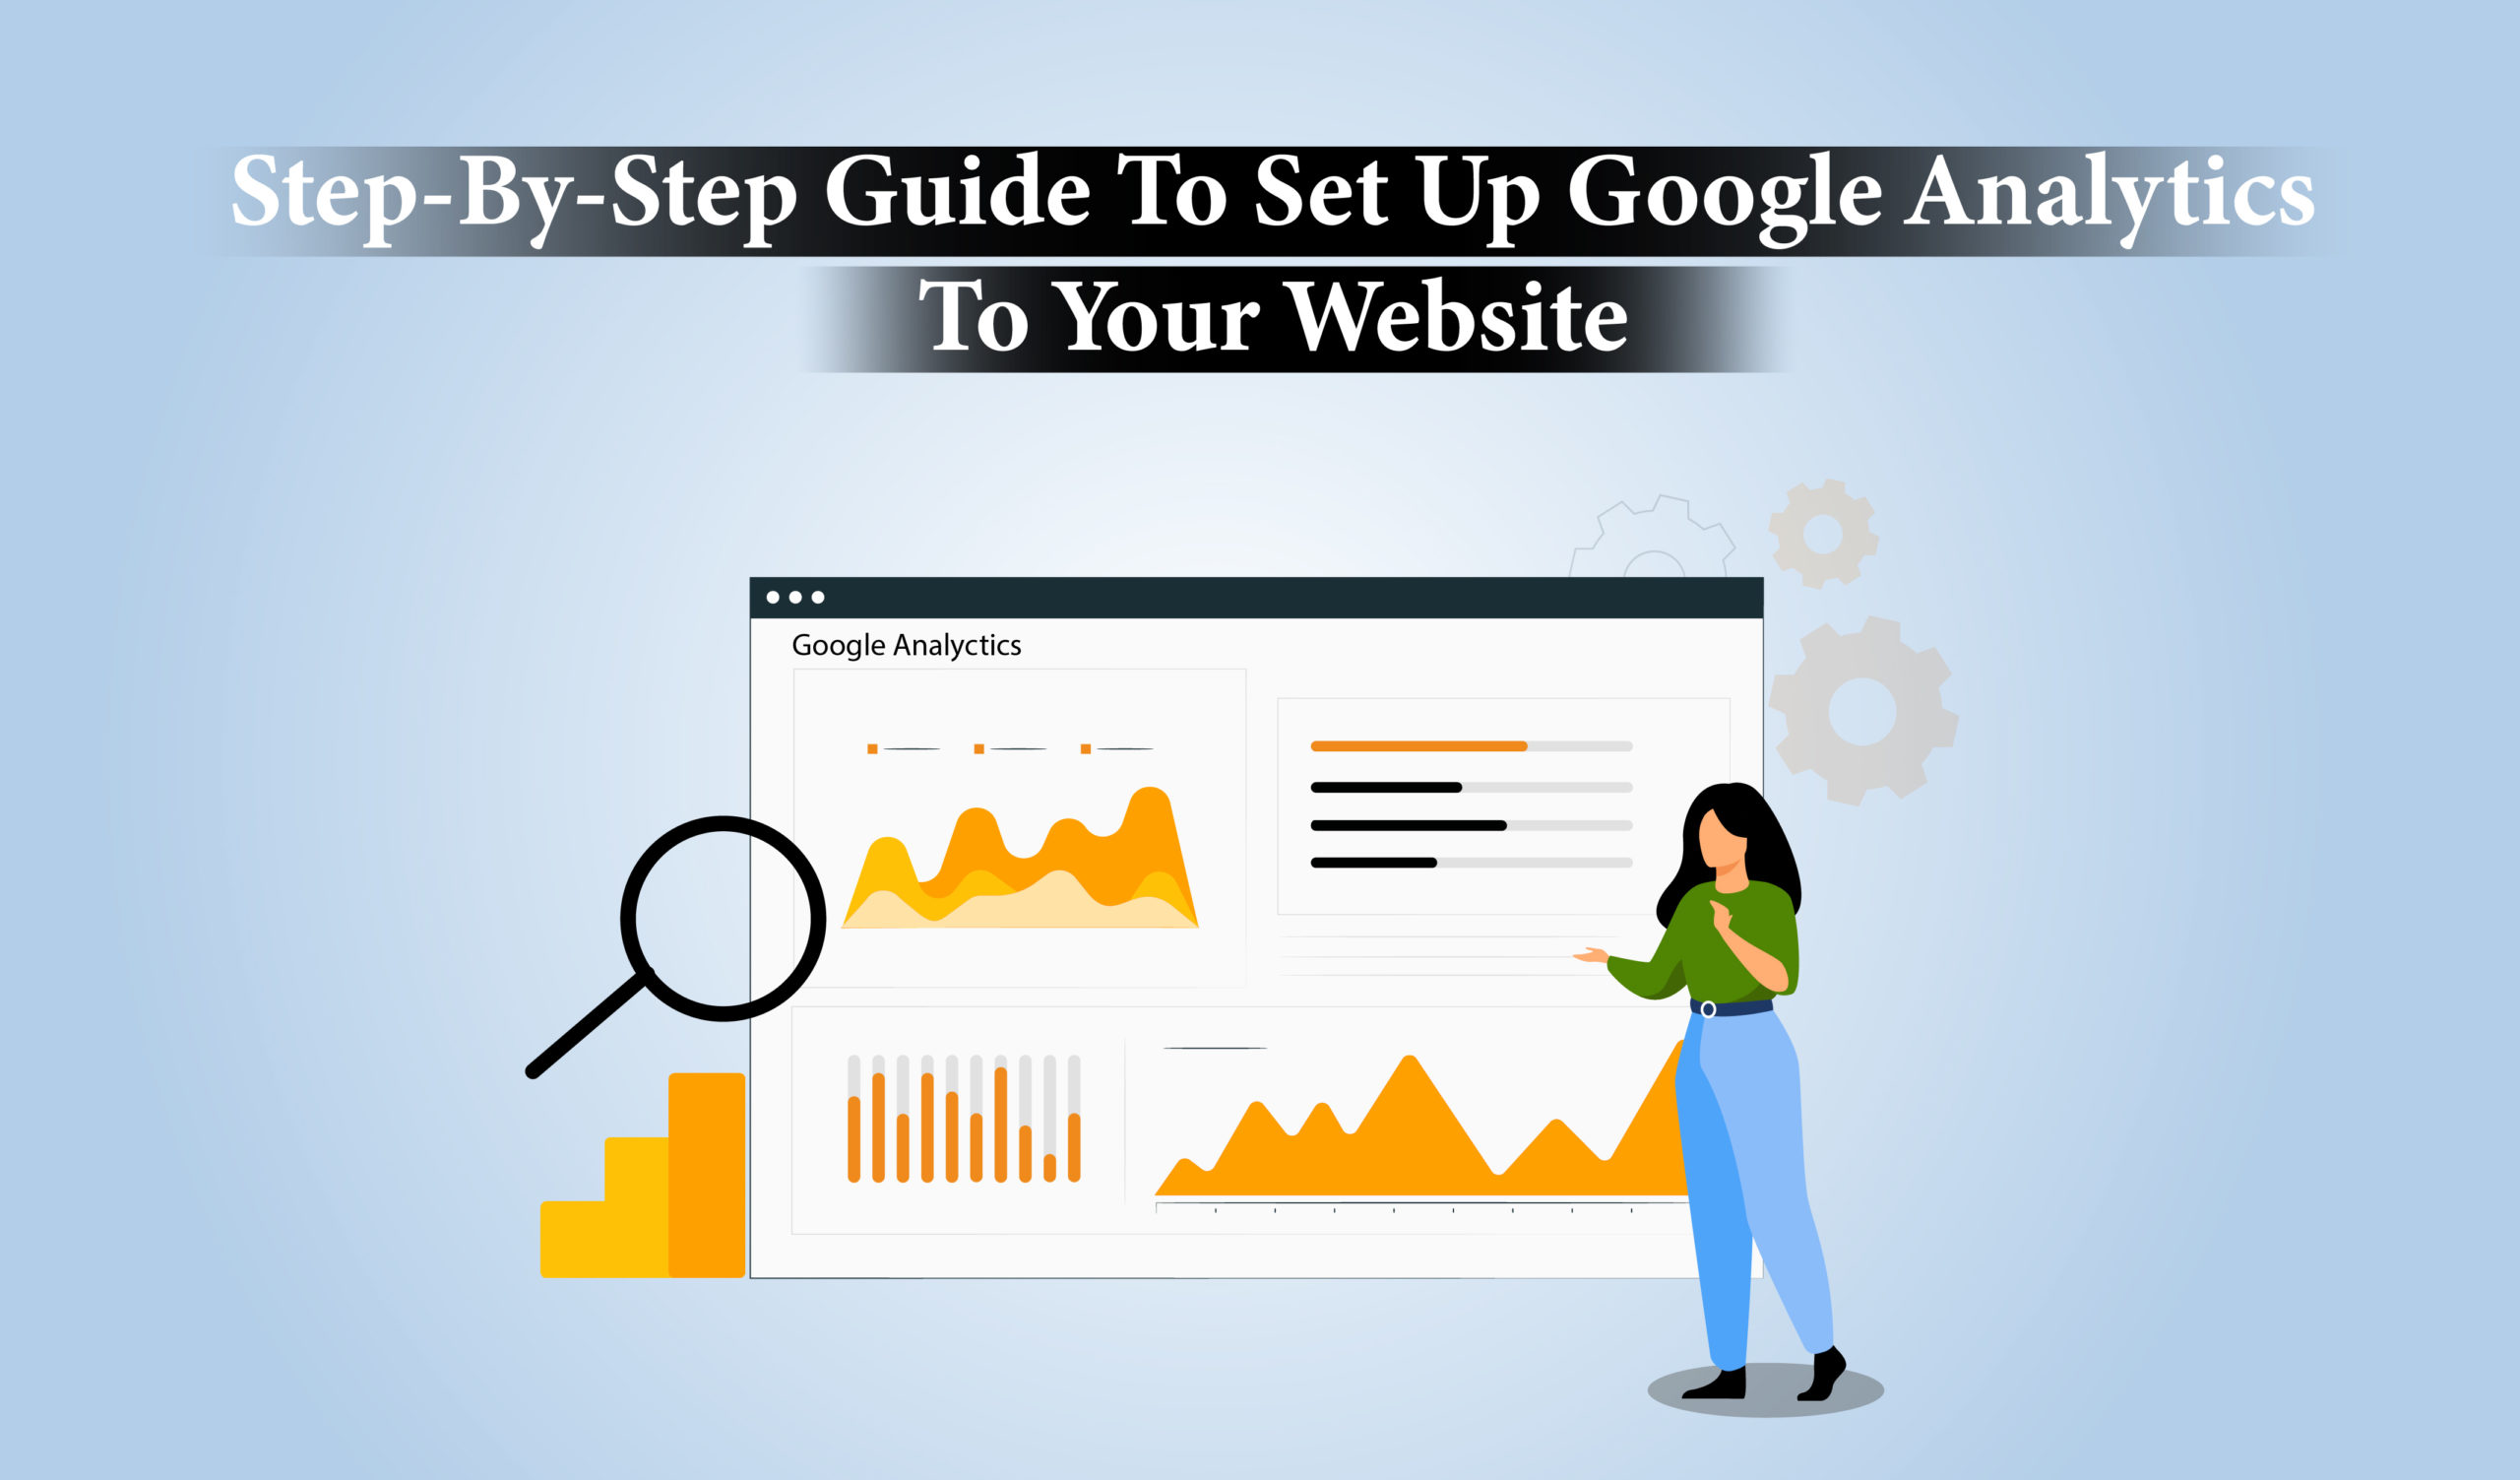 A Step-By-Step Guide to Set Up Google Analytics On Your Website 